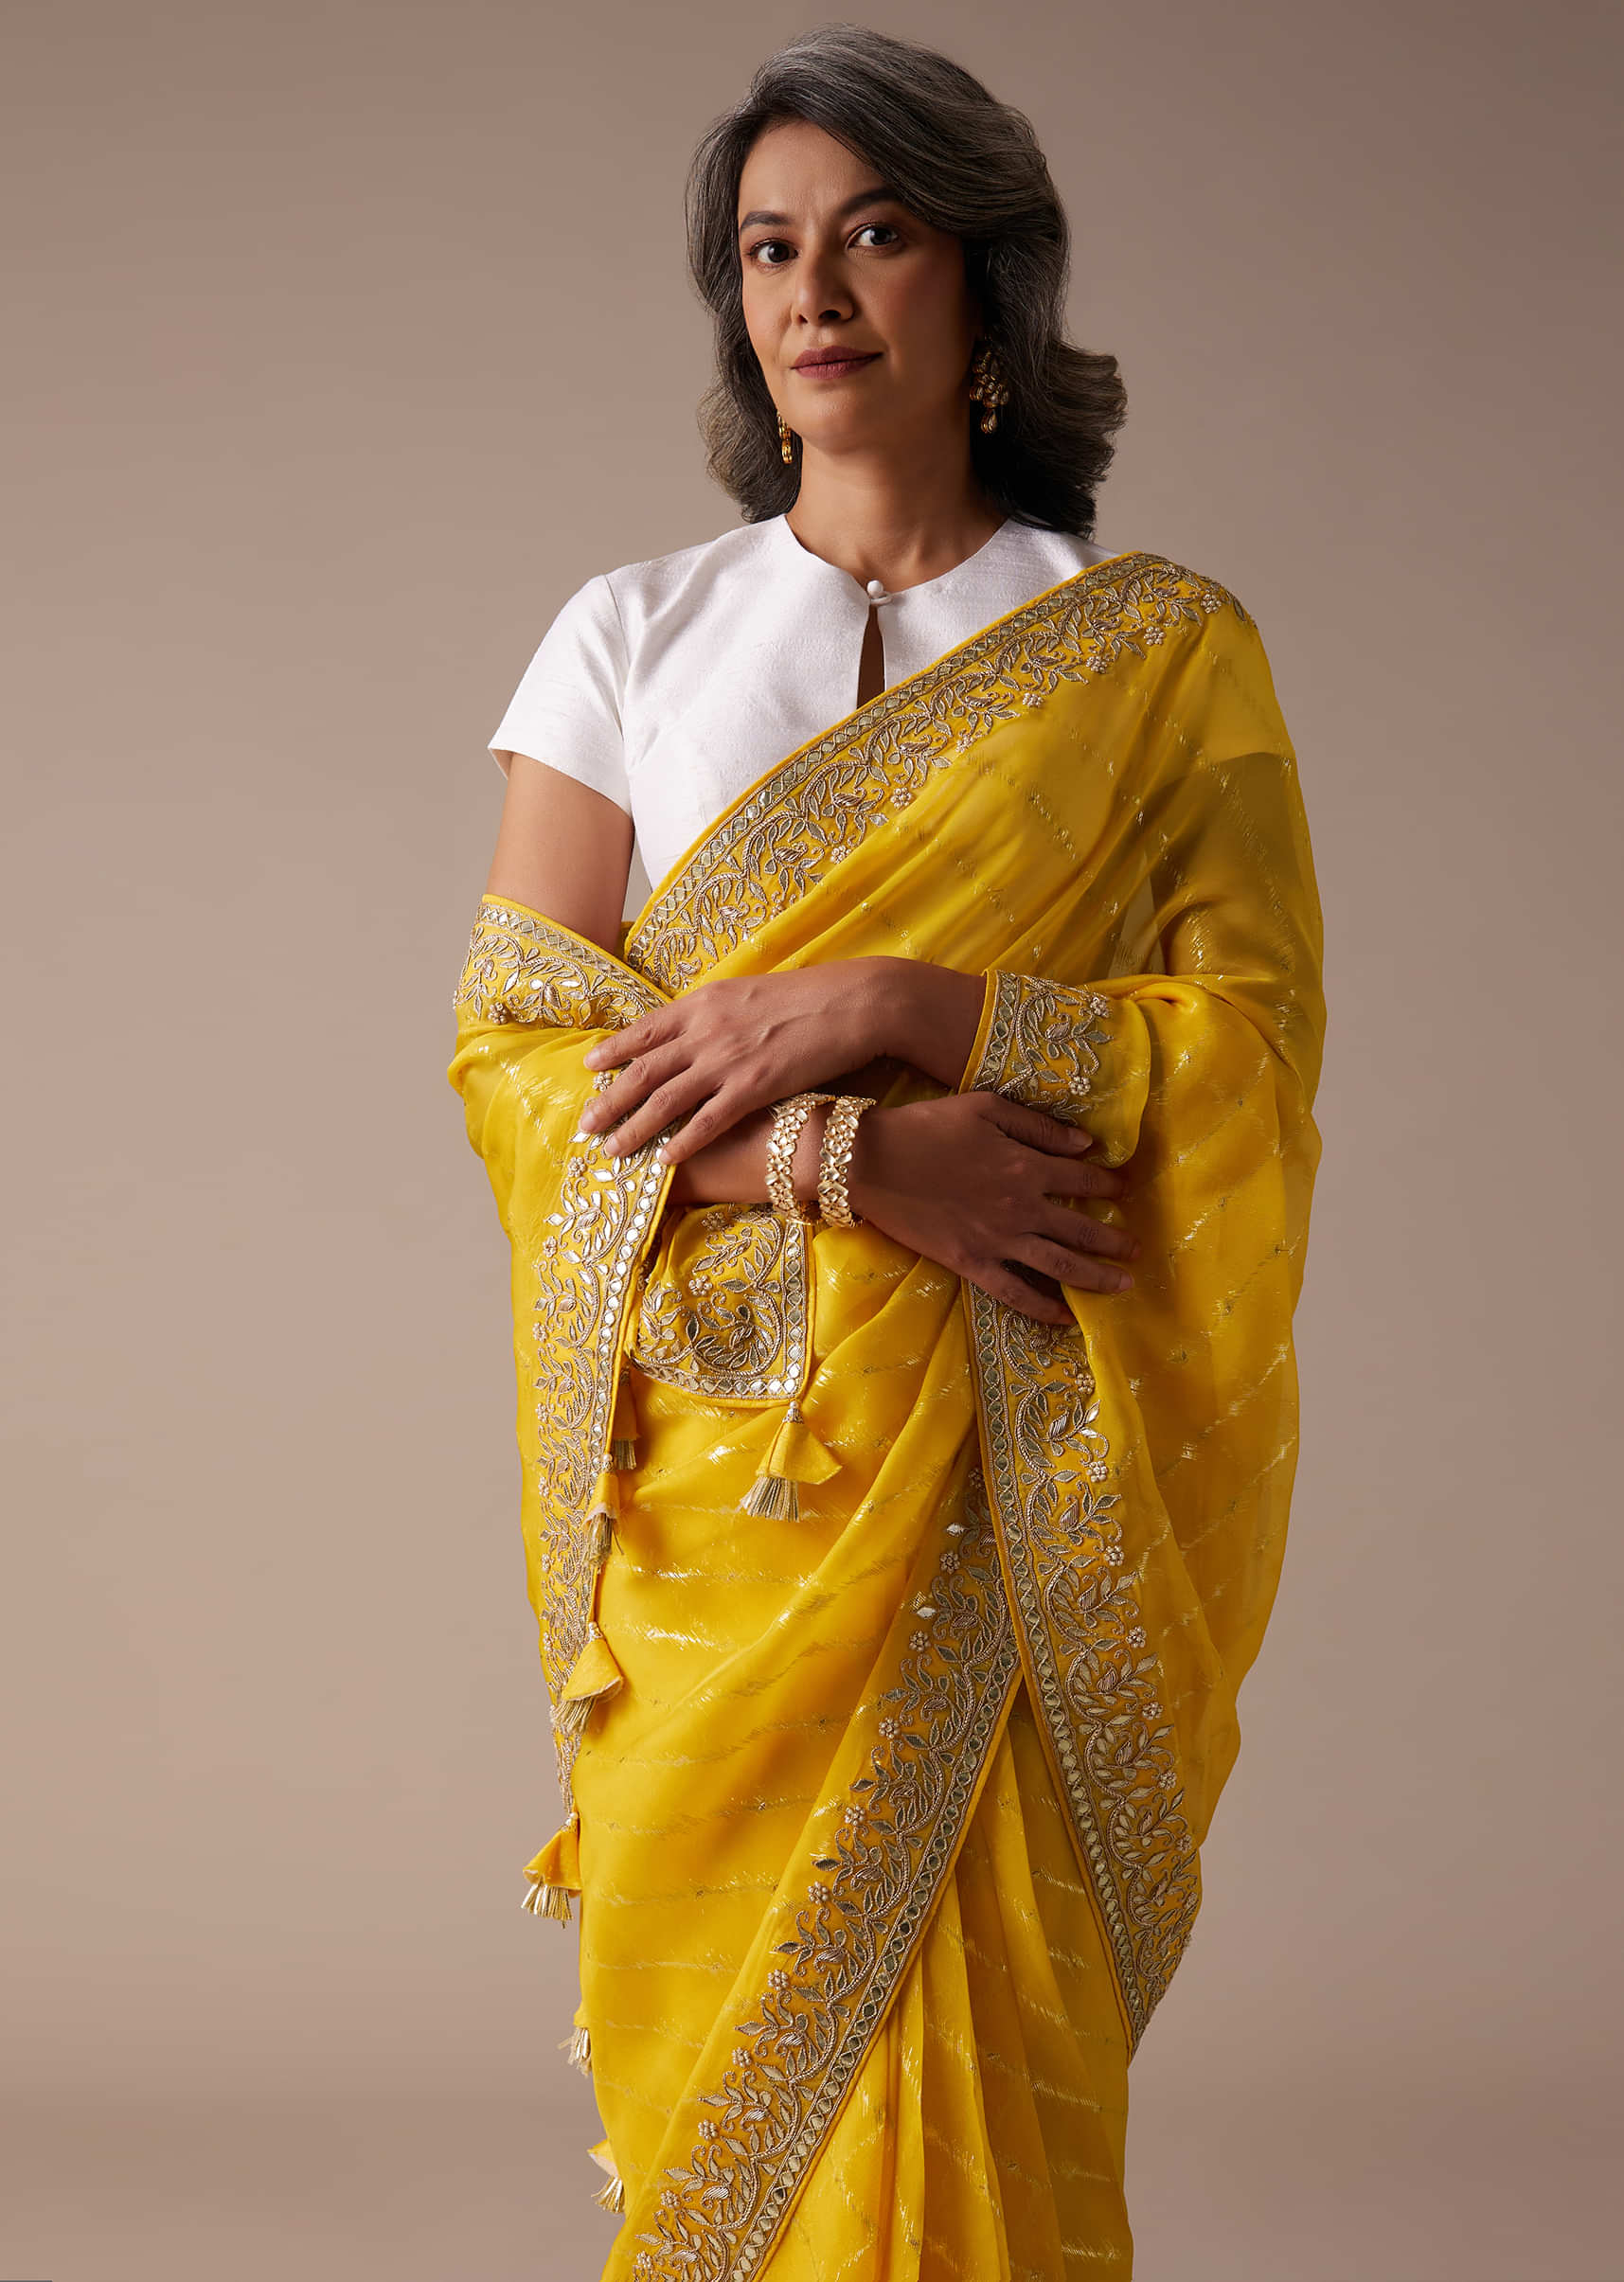 Canary Yellow Saree In Organza With Lurex Woven Diagonal Stripes And Gotta Embroidered Floral Border  